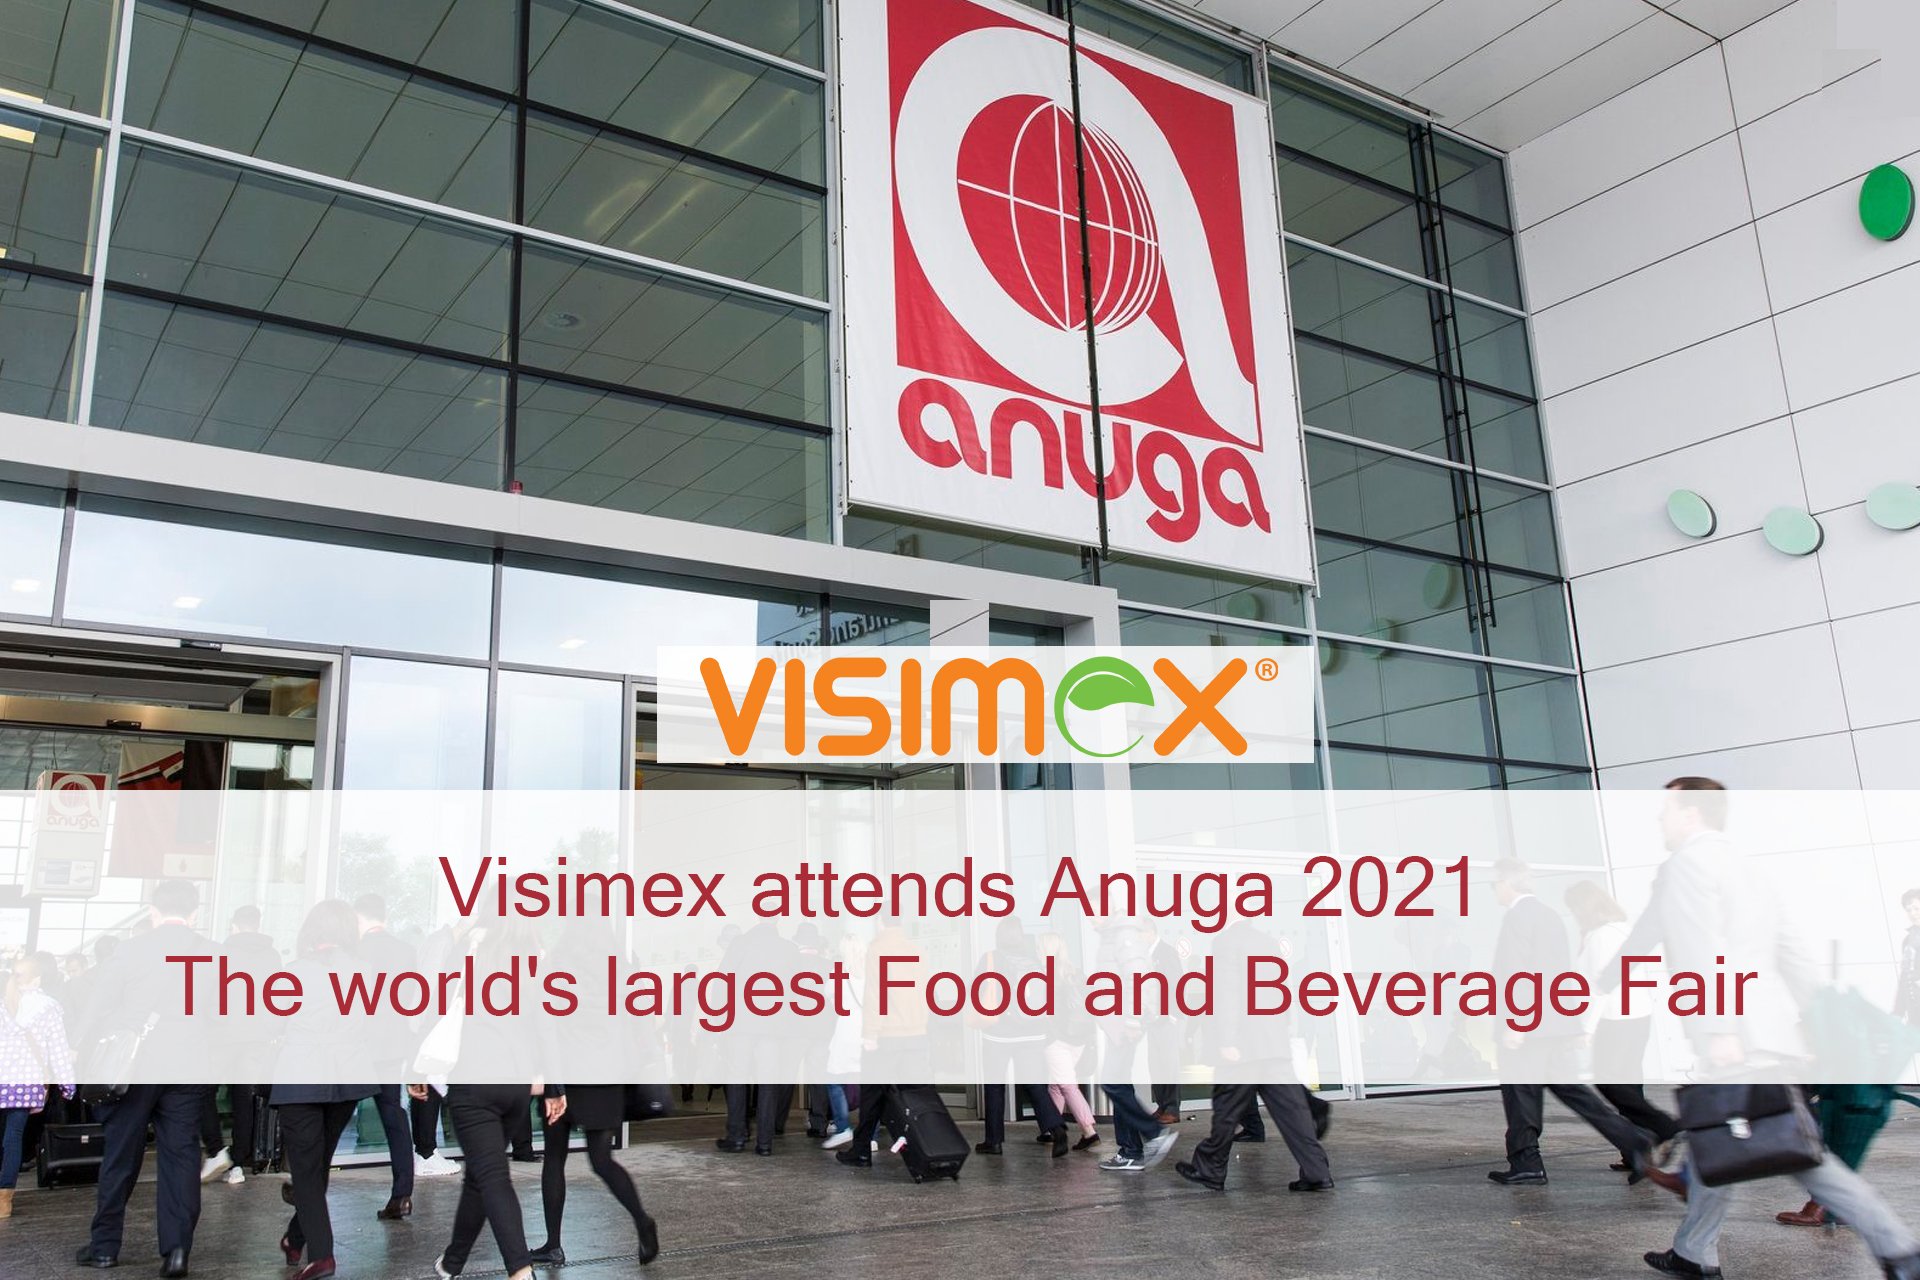 Visimex attends Anuga 2021 – The world's largest Food and Beverage Fair